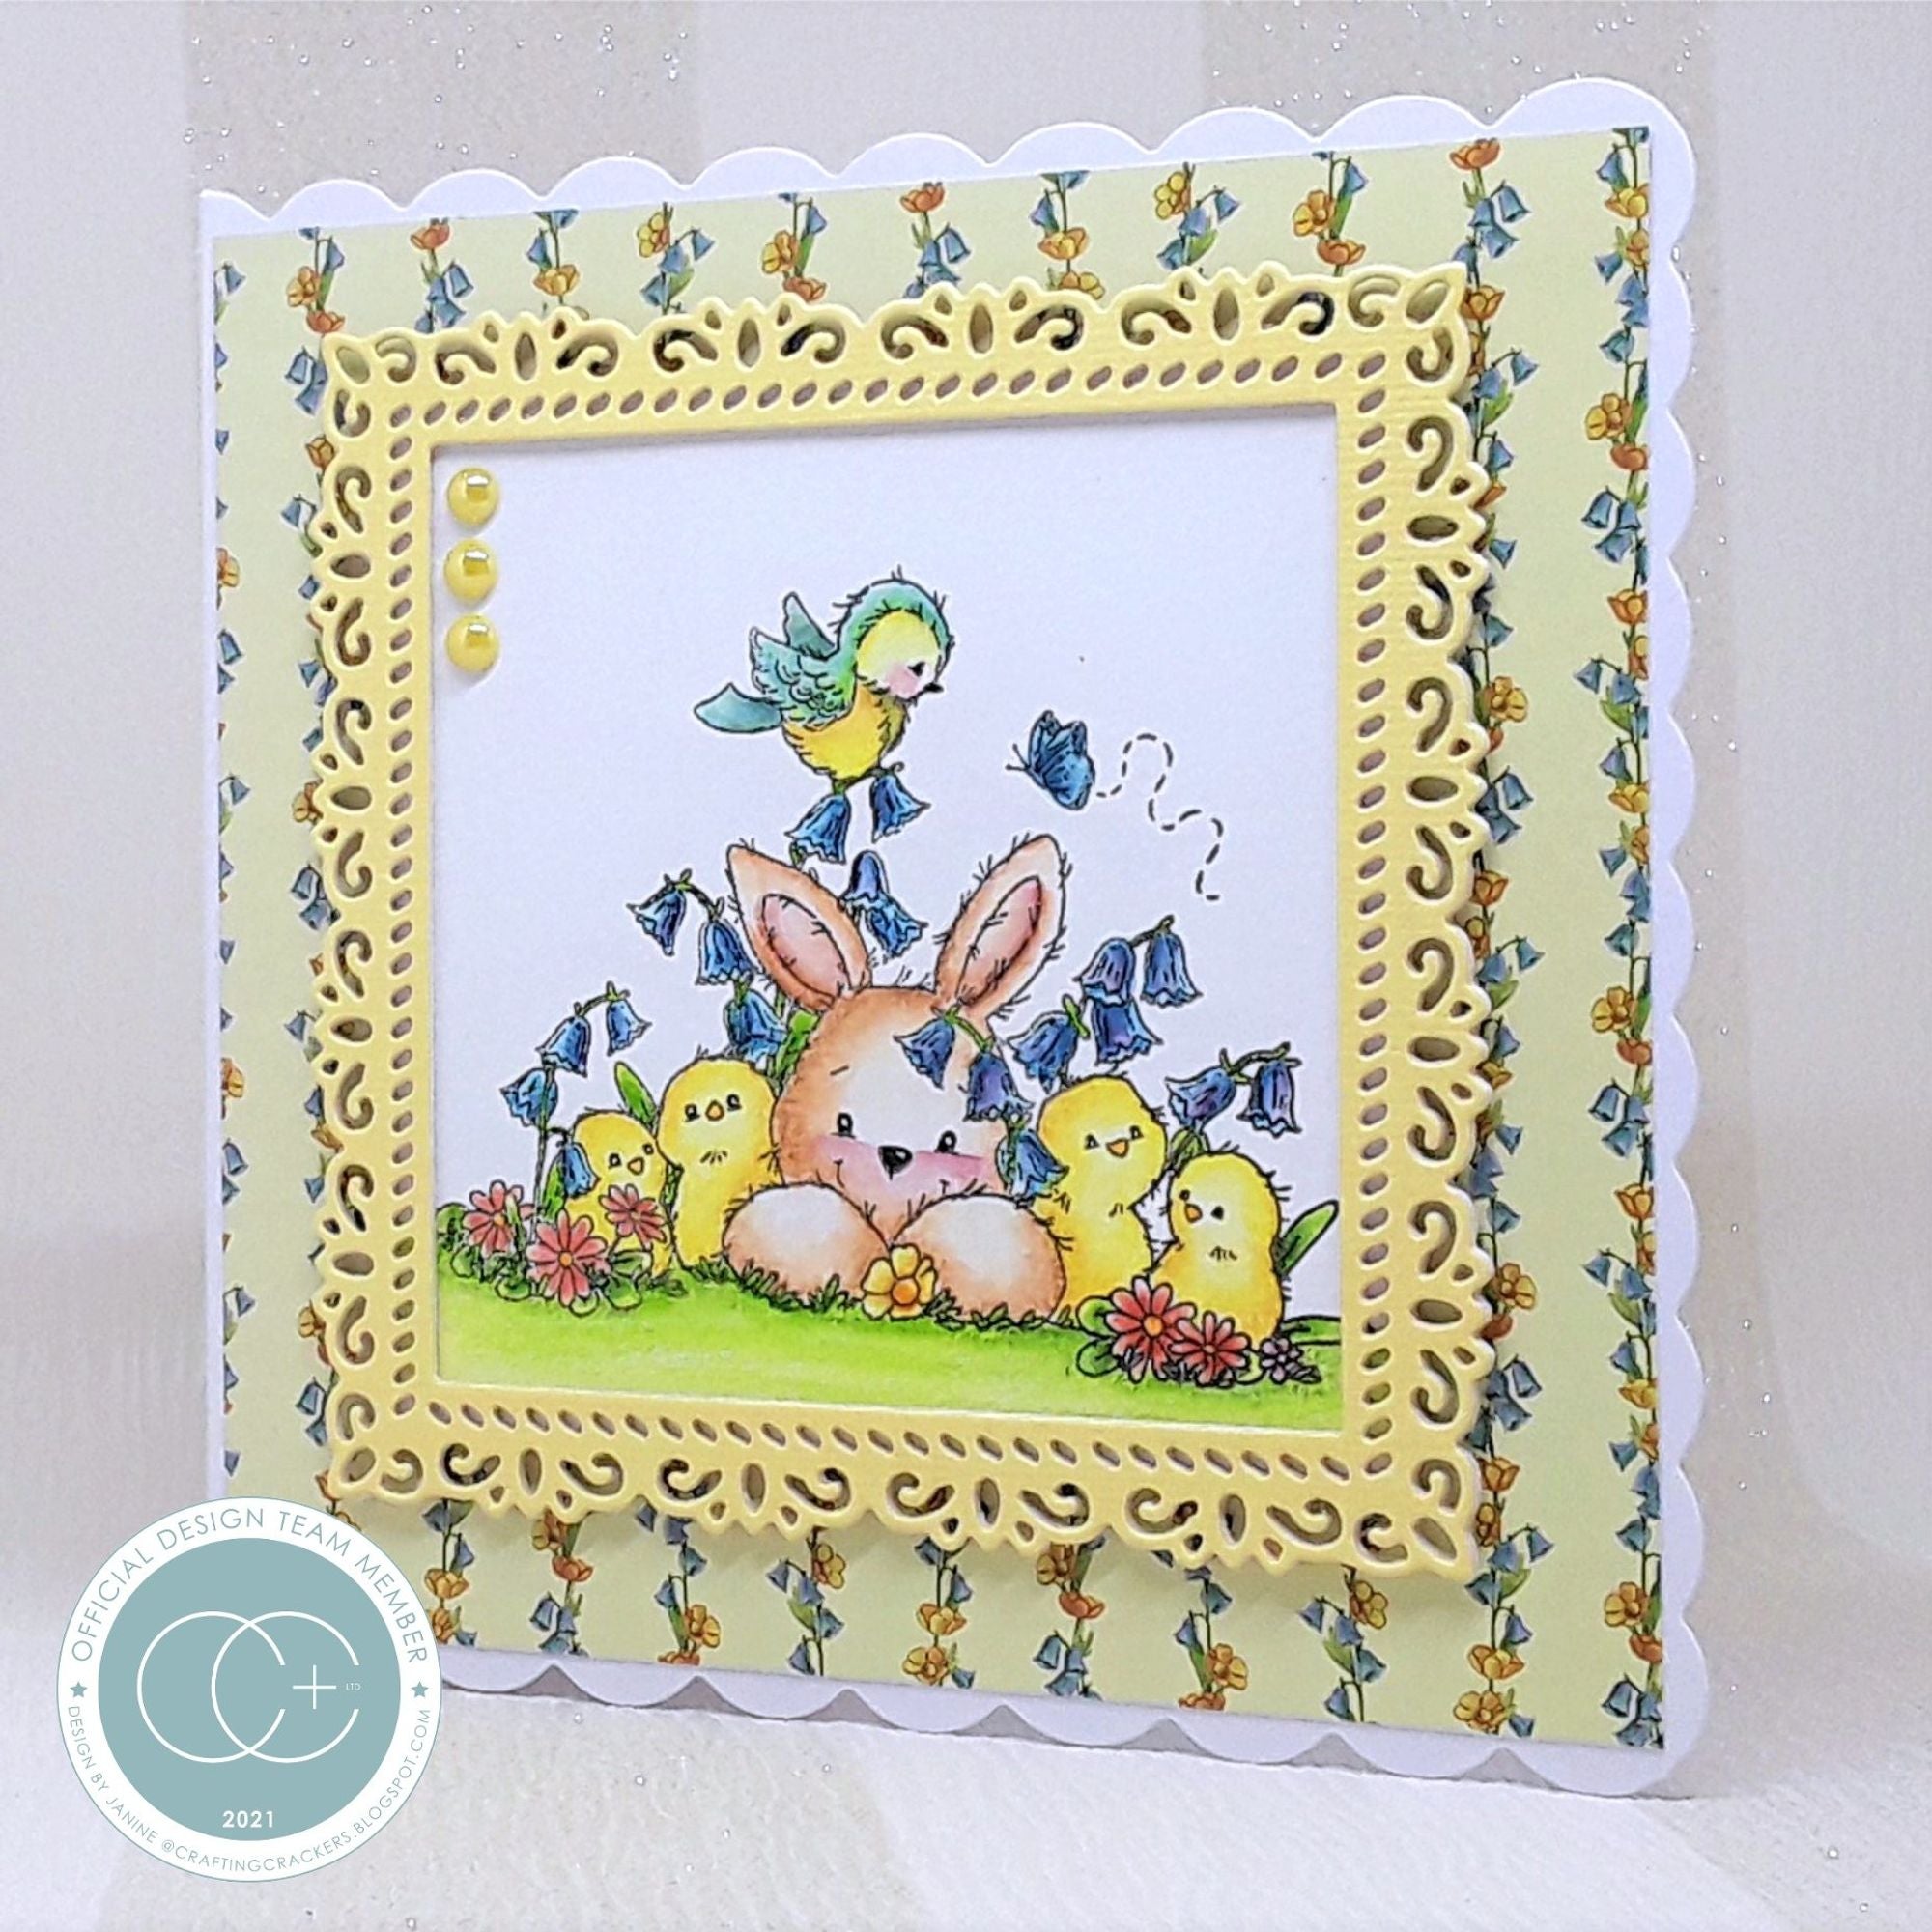 Bluebells and Buttercups - Stamp Set - Chicks